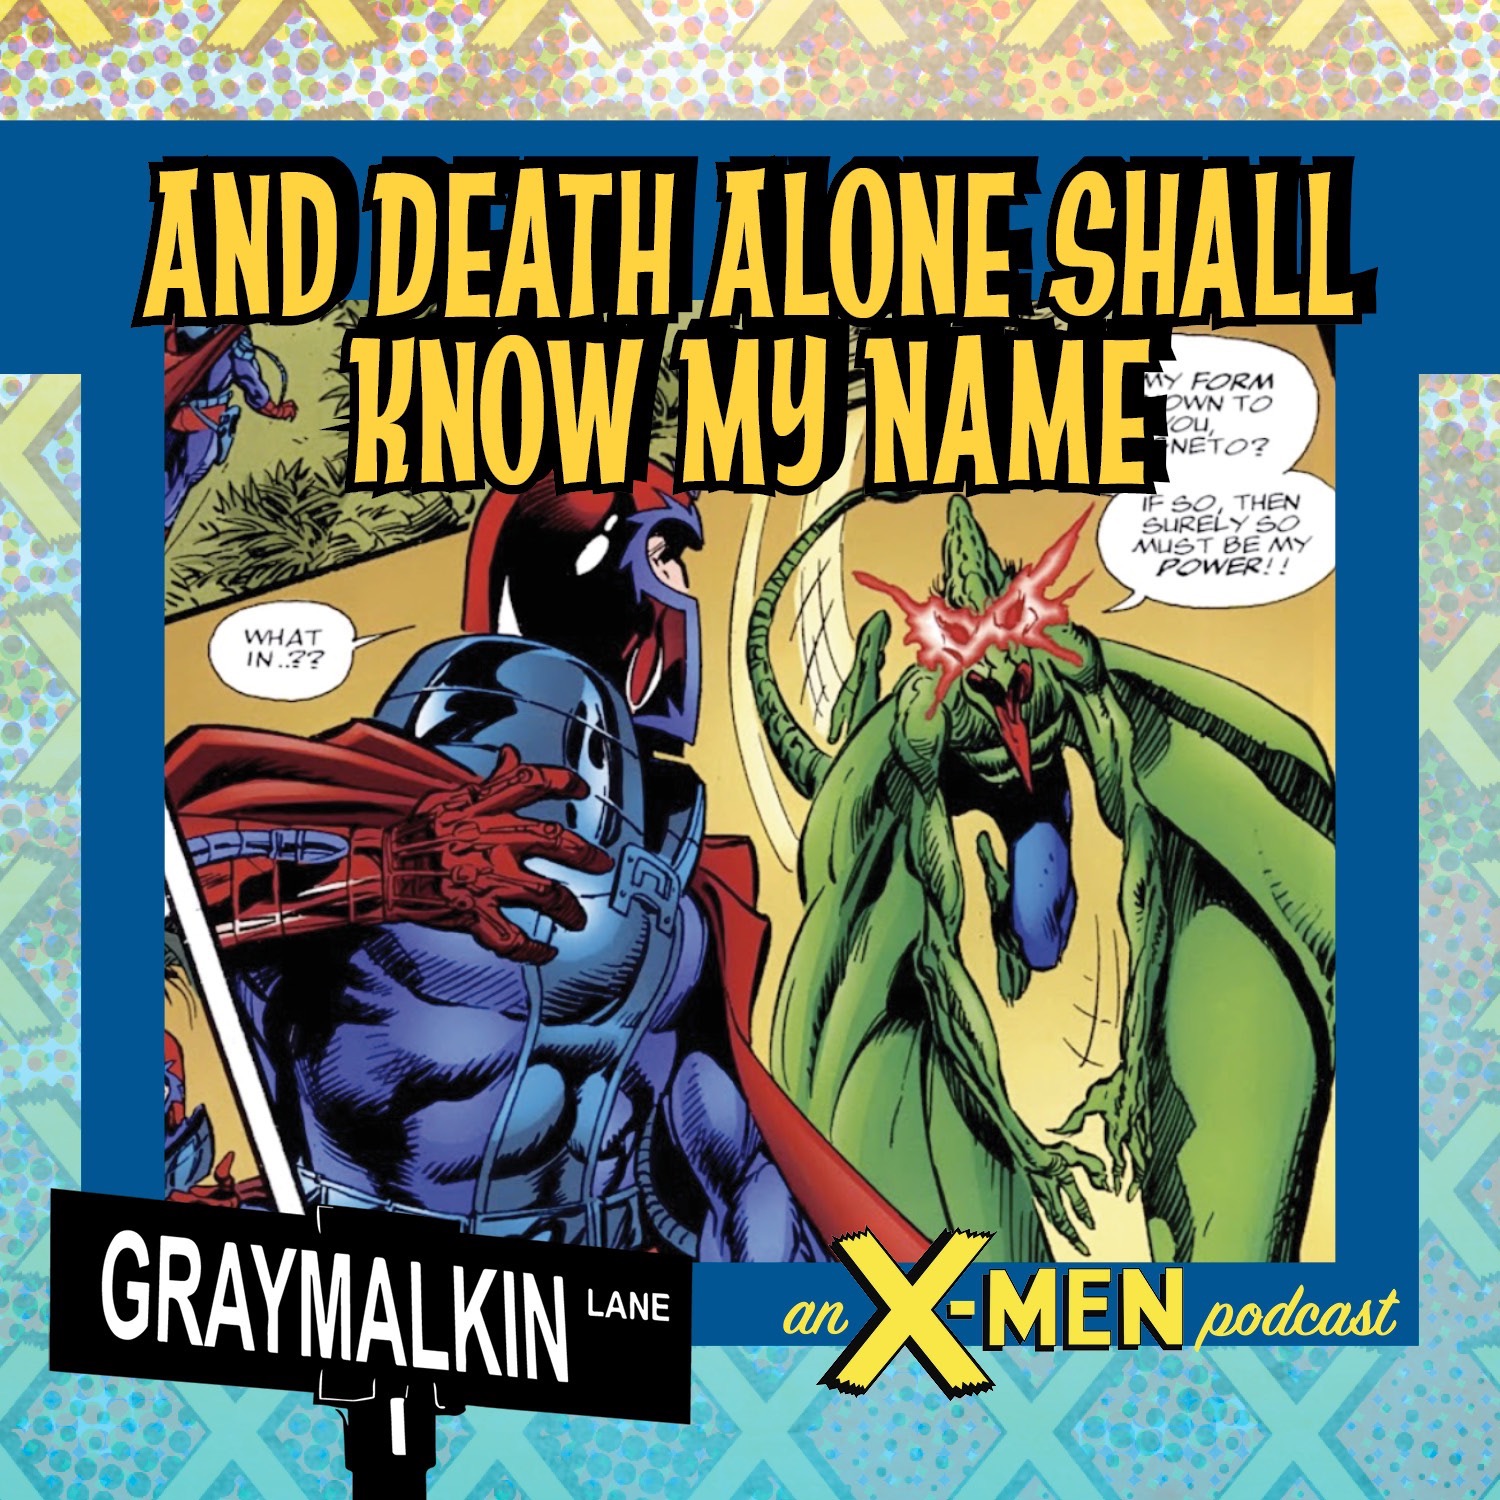 X-Men: the Hidden Years 12: And Death Alone Shall Know My Name! Featuring Markisan Naso! Jason Muhr! Patrick Lugo!